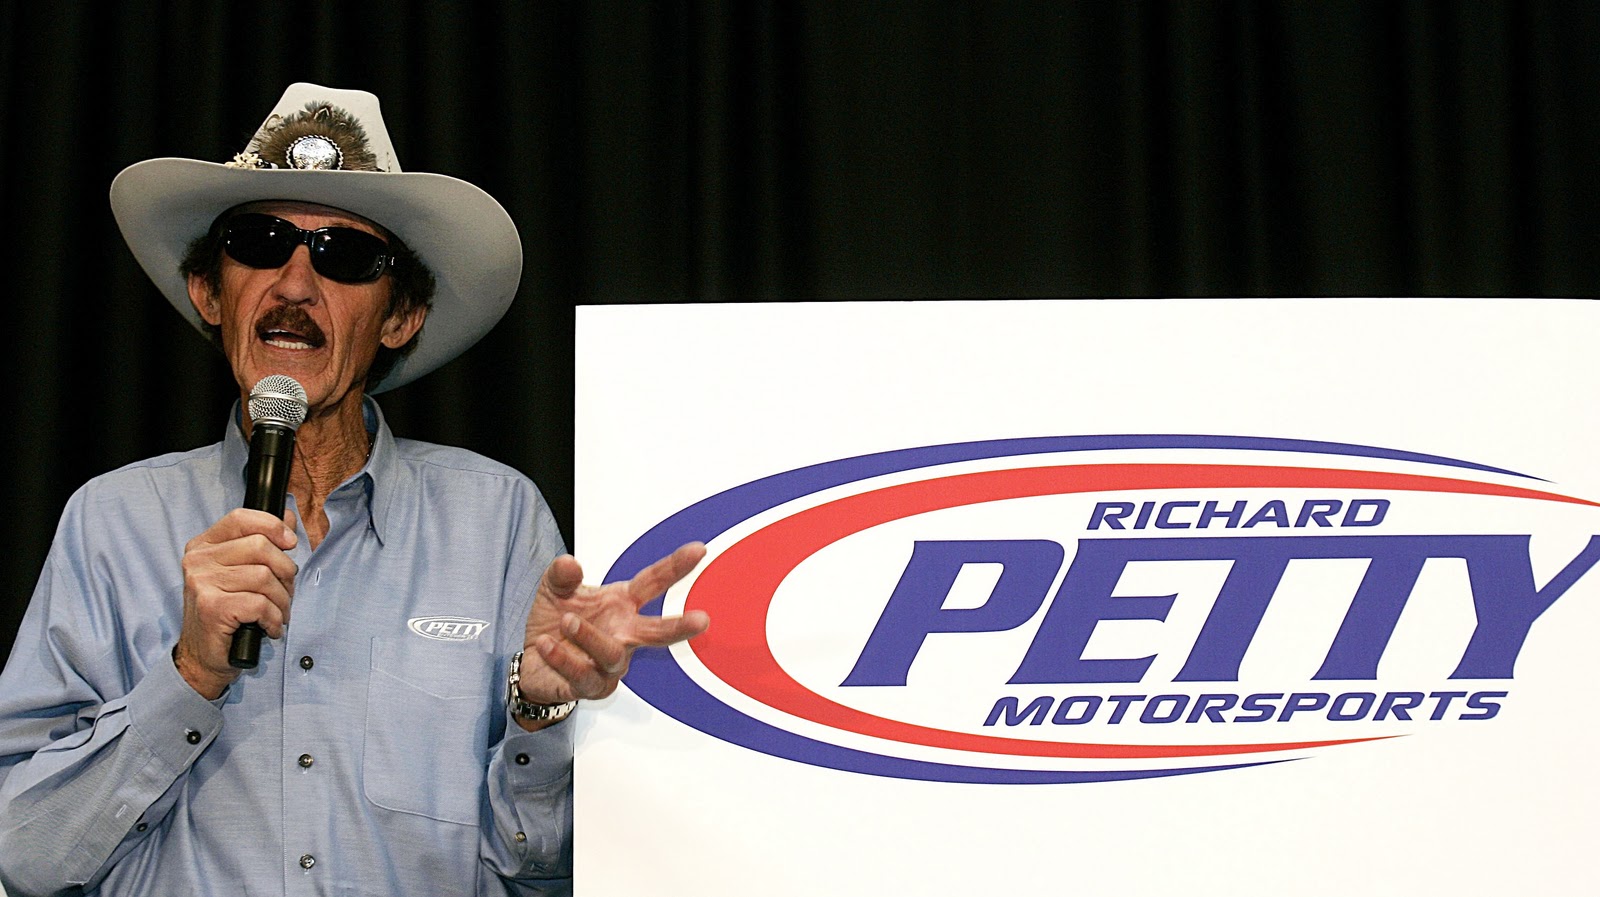 Richard Petty and financial partners take control of RPM - Skirts and Scuffs1600 x 897